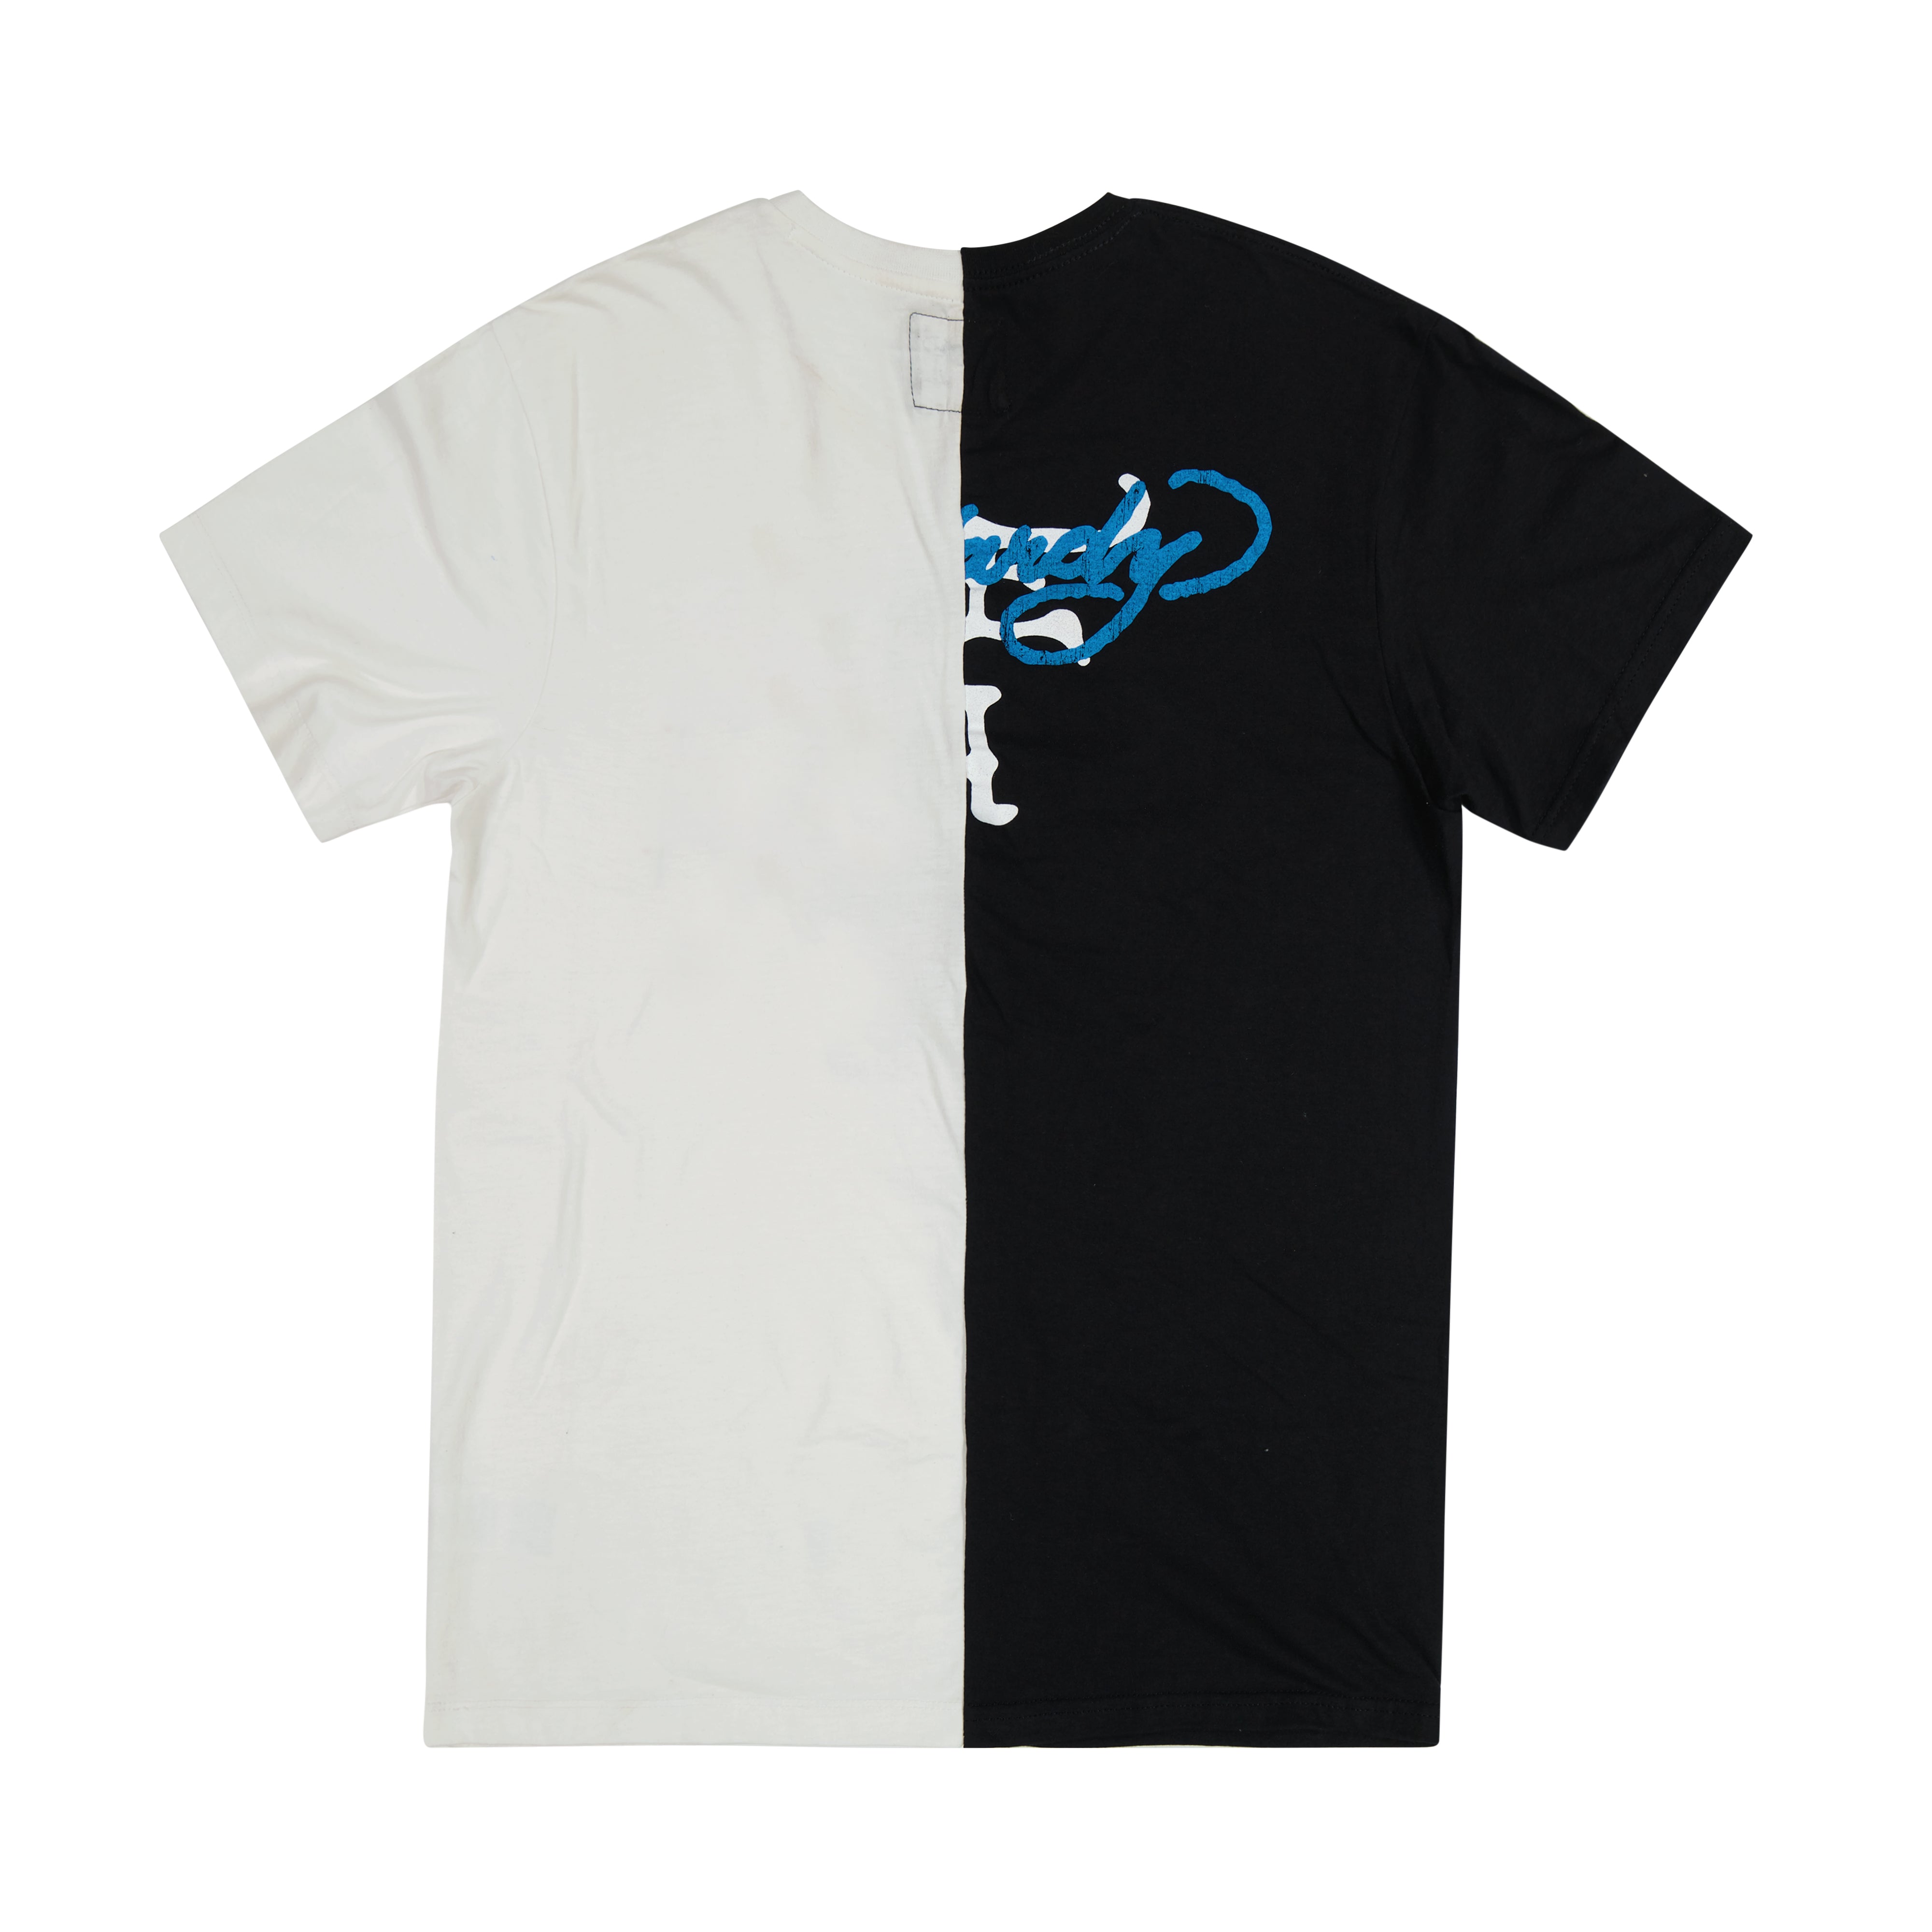 Limited Edition - One of a Kind Split Tee